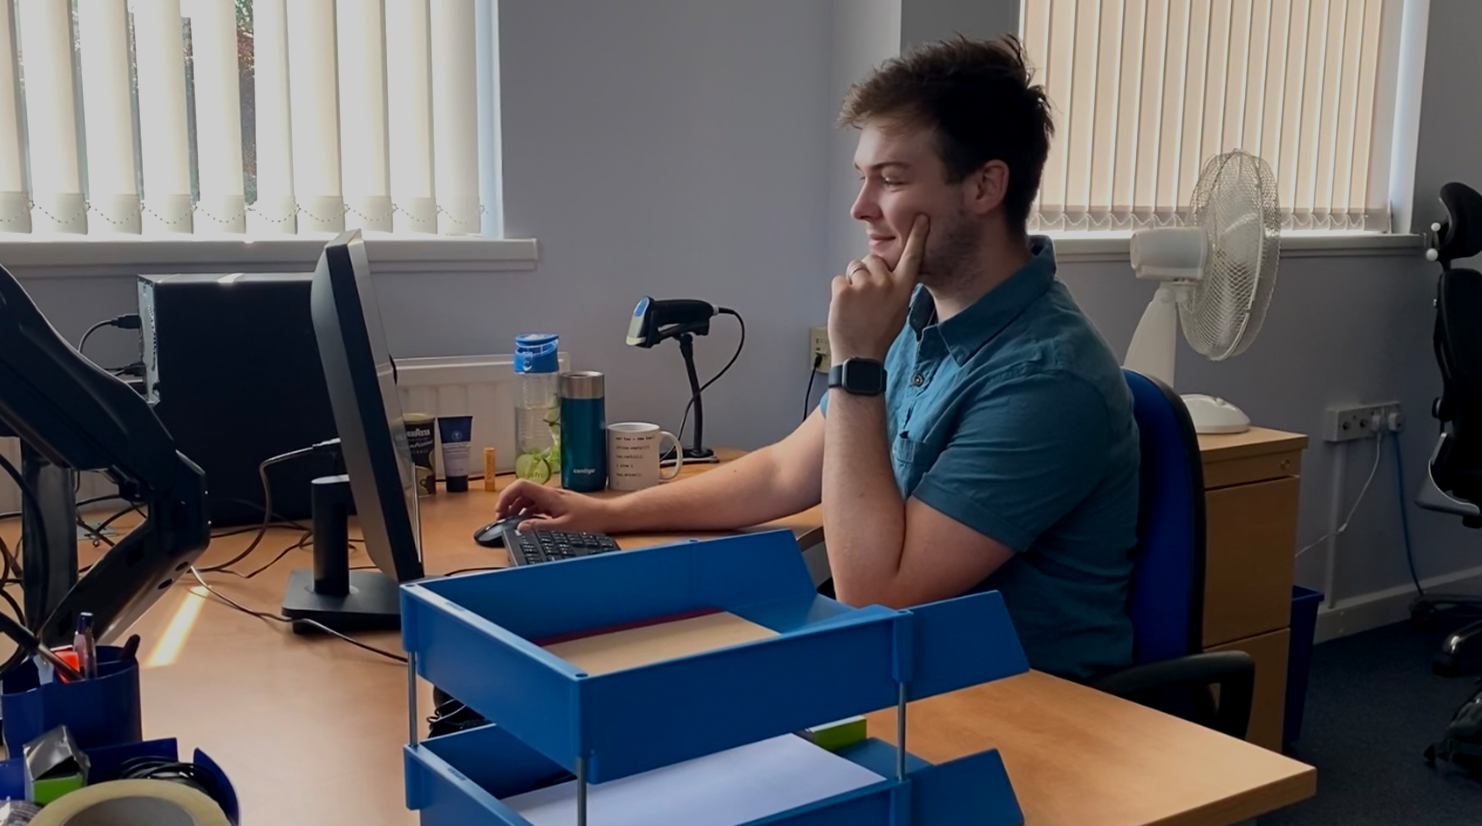 Ollie Wilkes sat at his desk, using his computer